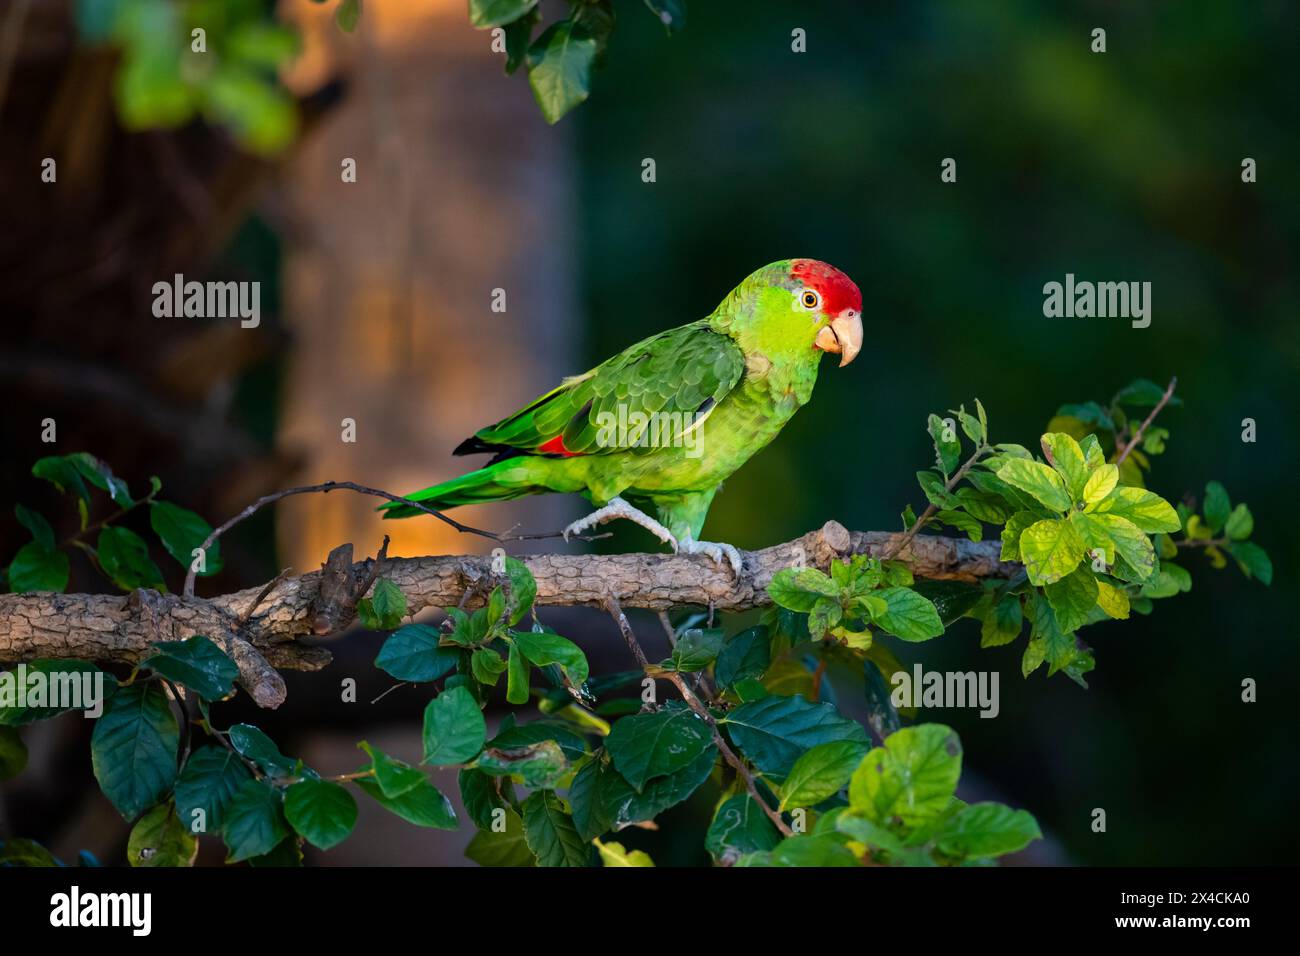 USA, Texas, Cameron County. Red-crowned parrot in anaqua tree Stock Photo